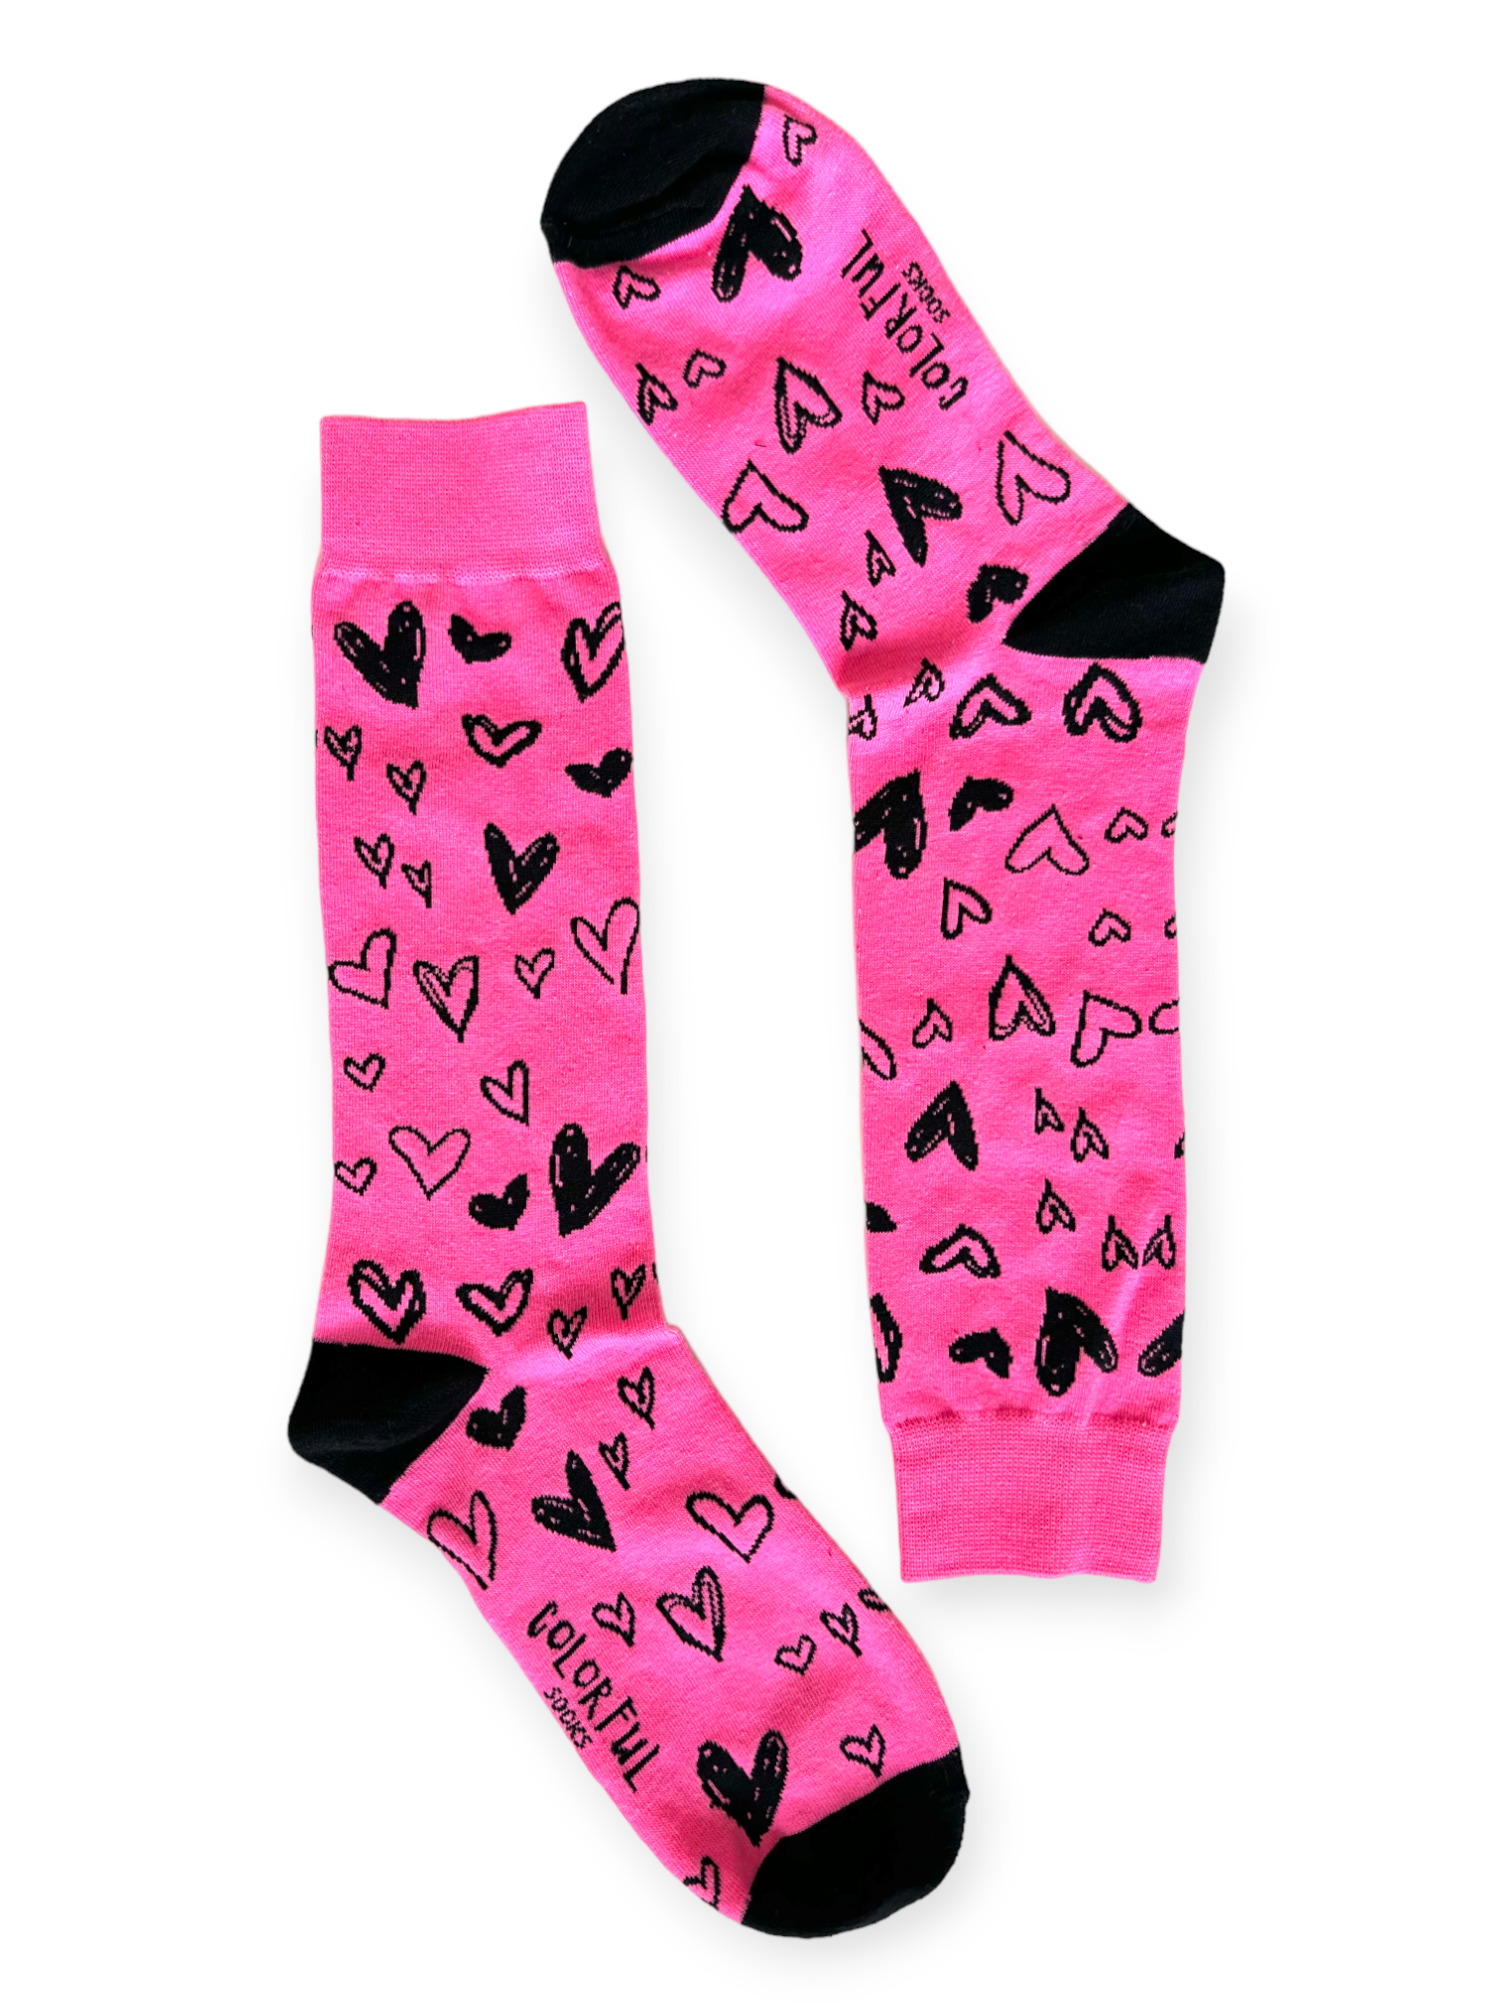 Martini and Hearts Colorful Socks Set of Four